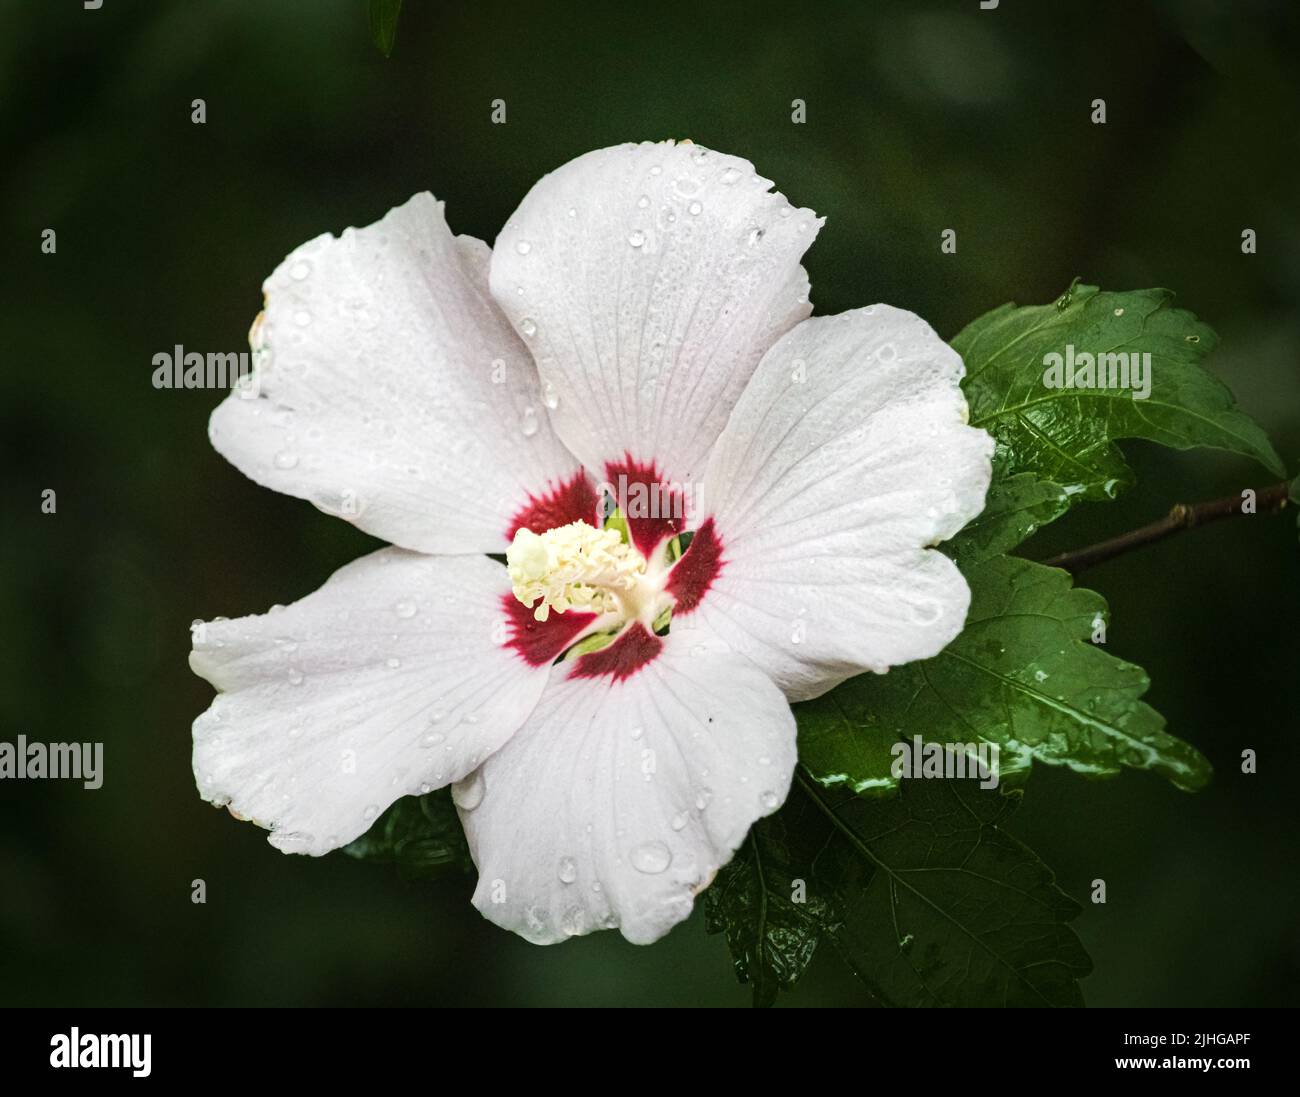 White Rose of Sharon flowers, Hibiscus syriacus, on a dark, lush green background in sunlight in summer or fall, Lancaster, Pennsylvania Stock Photo